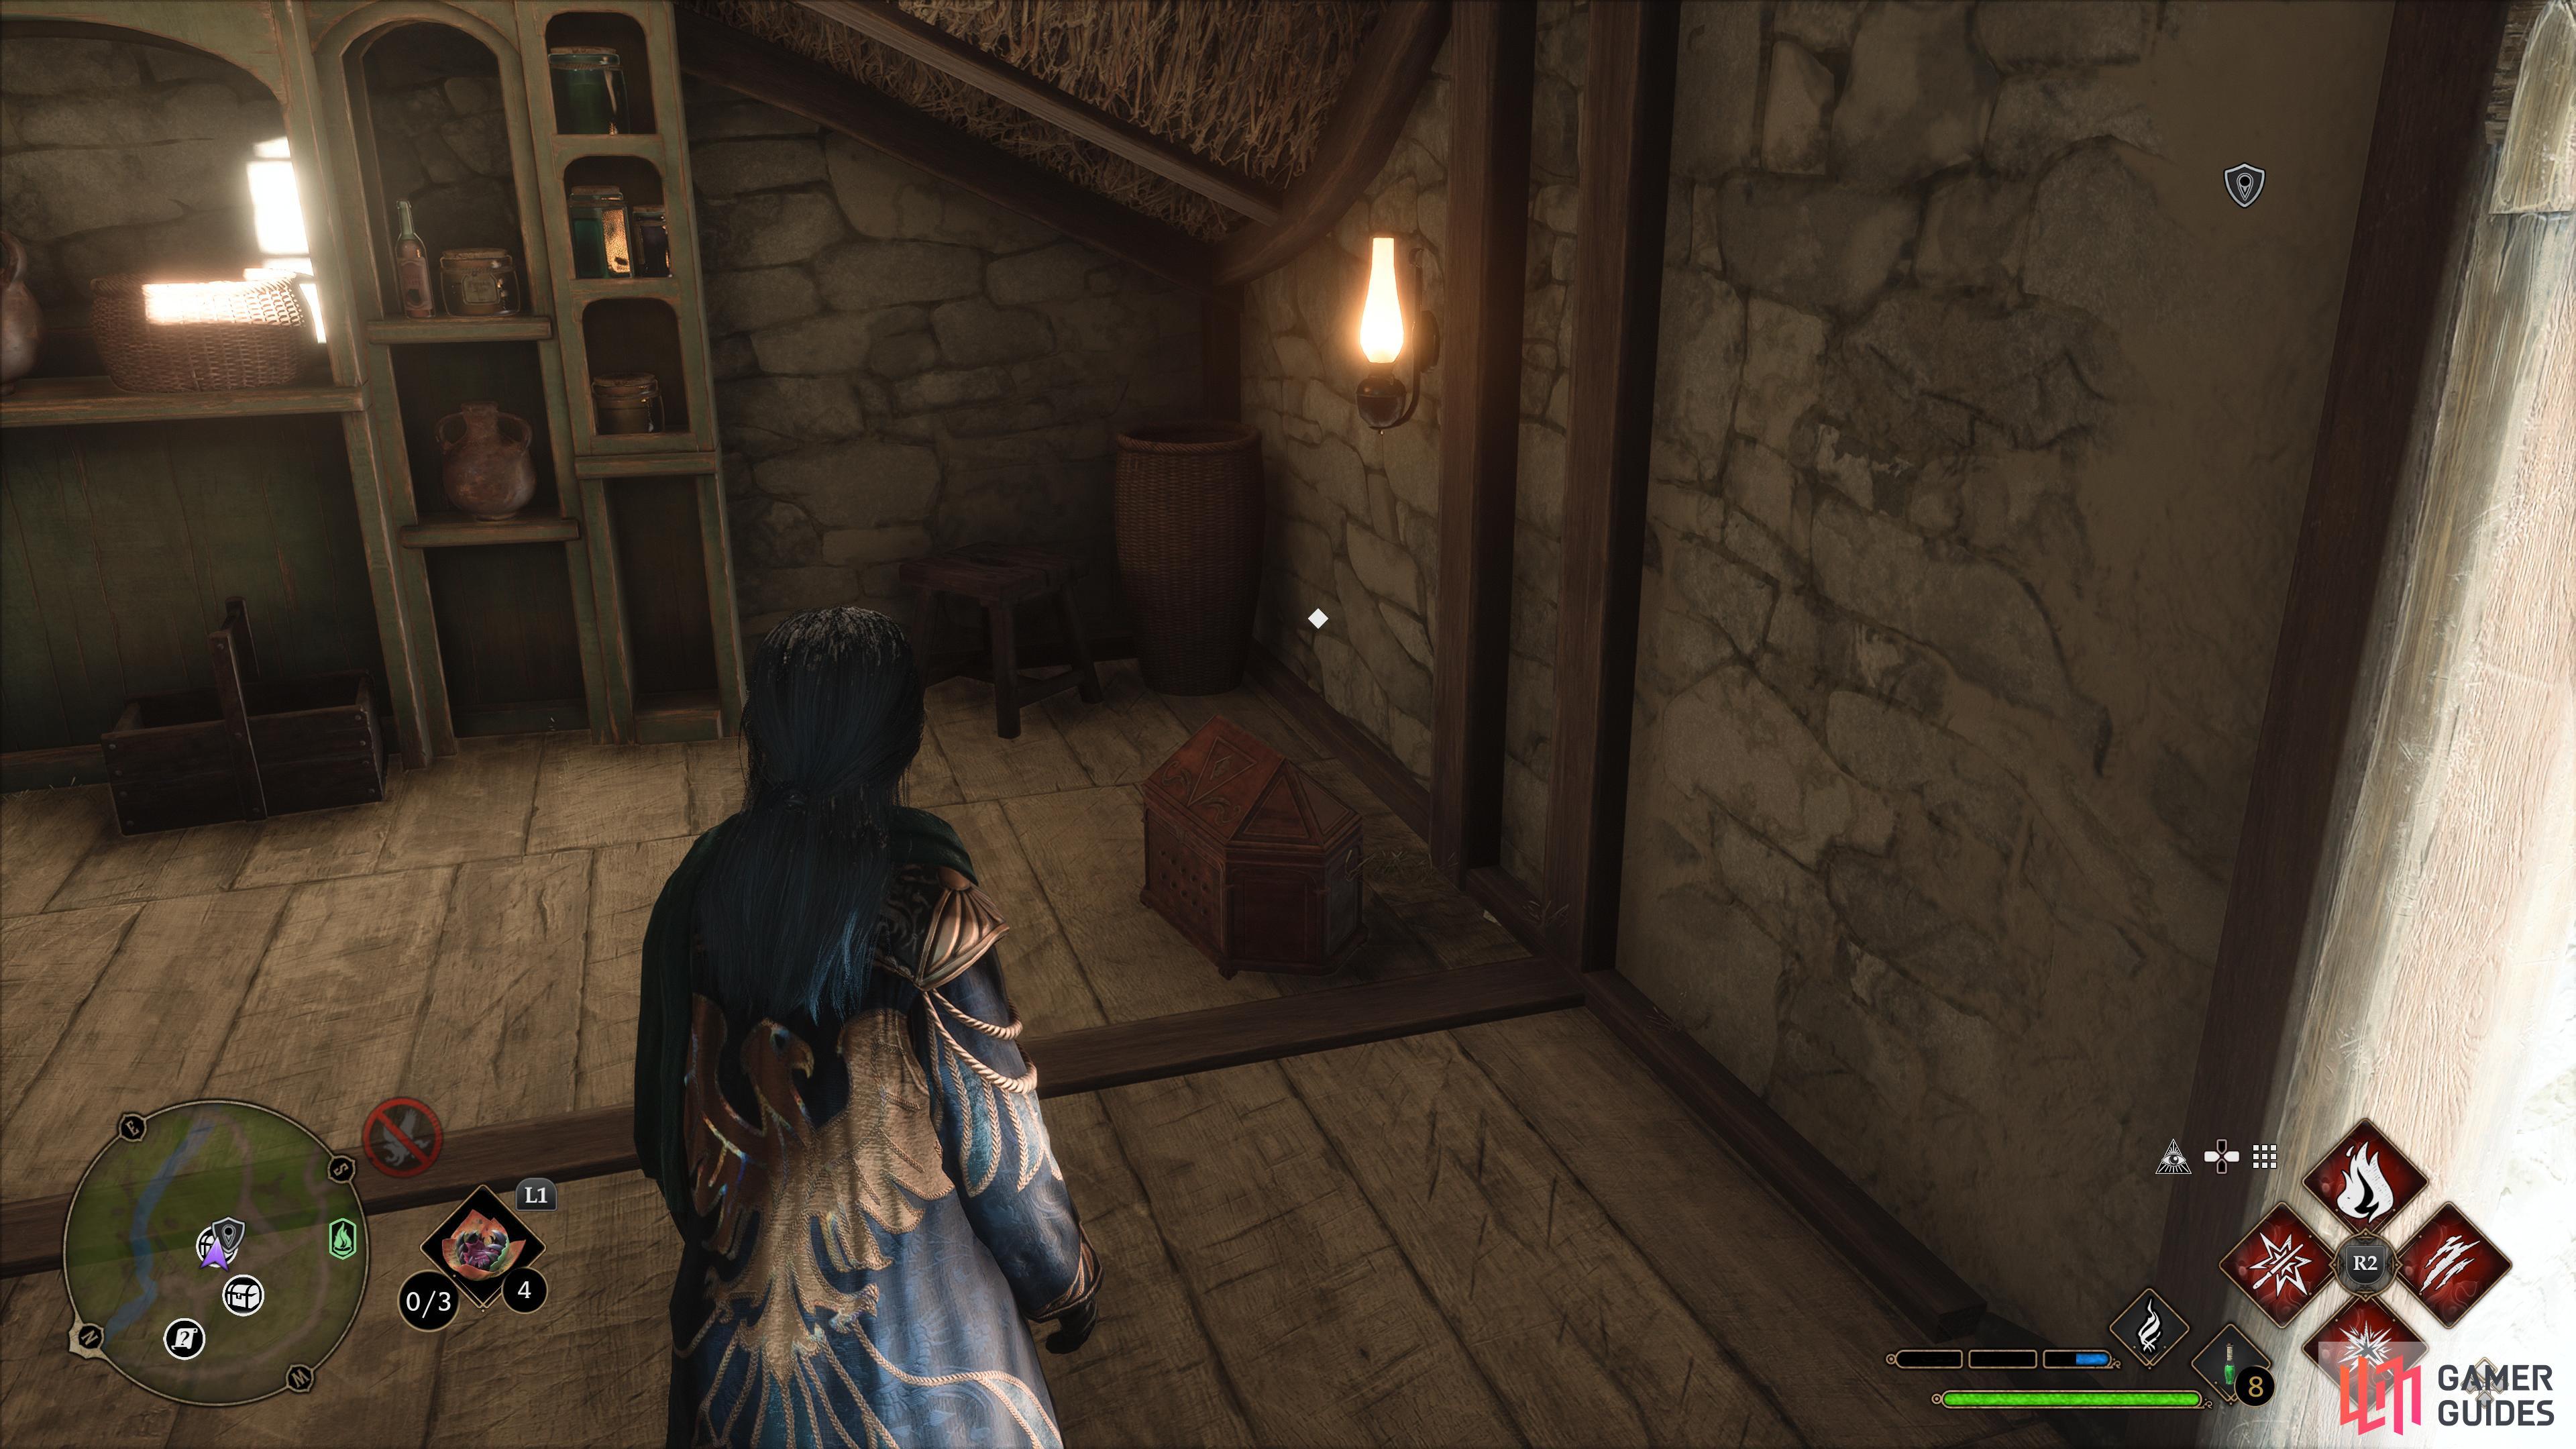 to find the Collection Chest sitting in a house behind Claire.